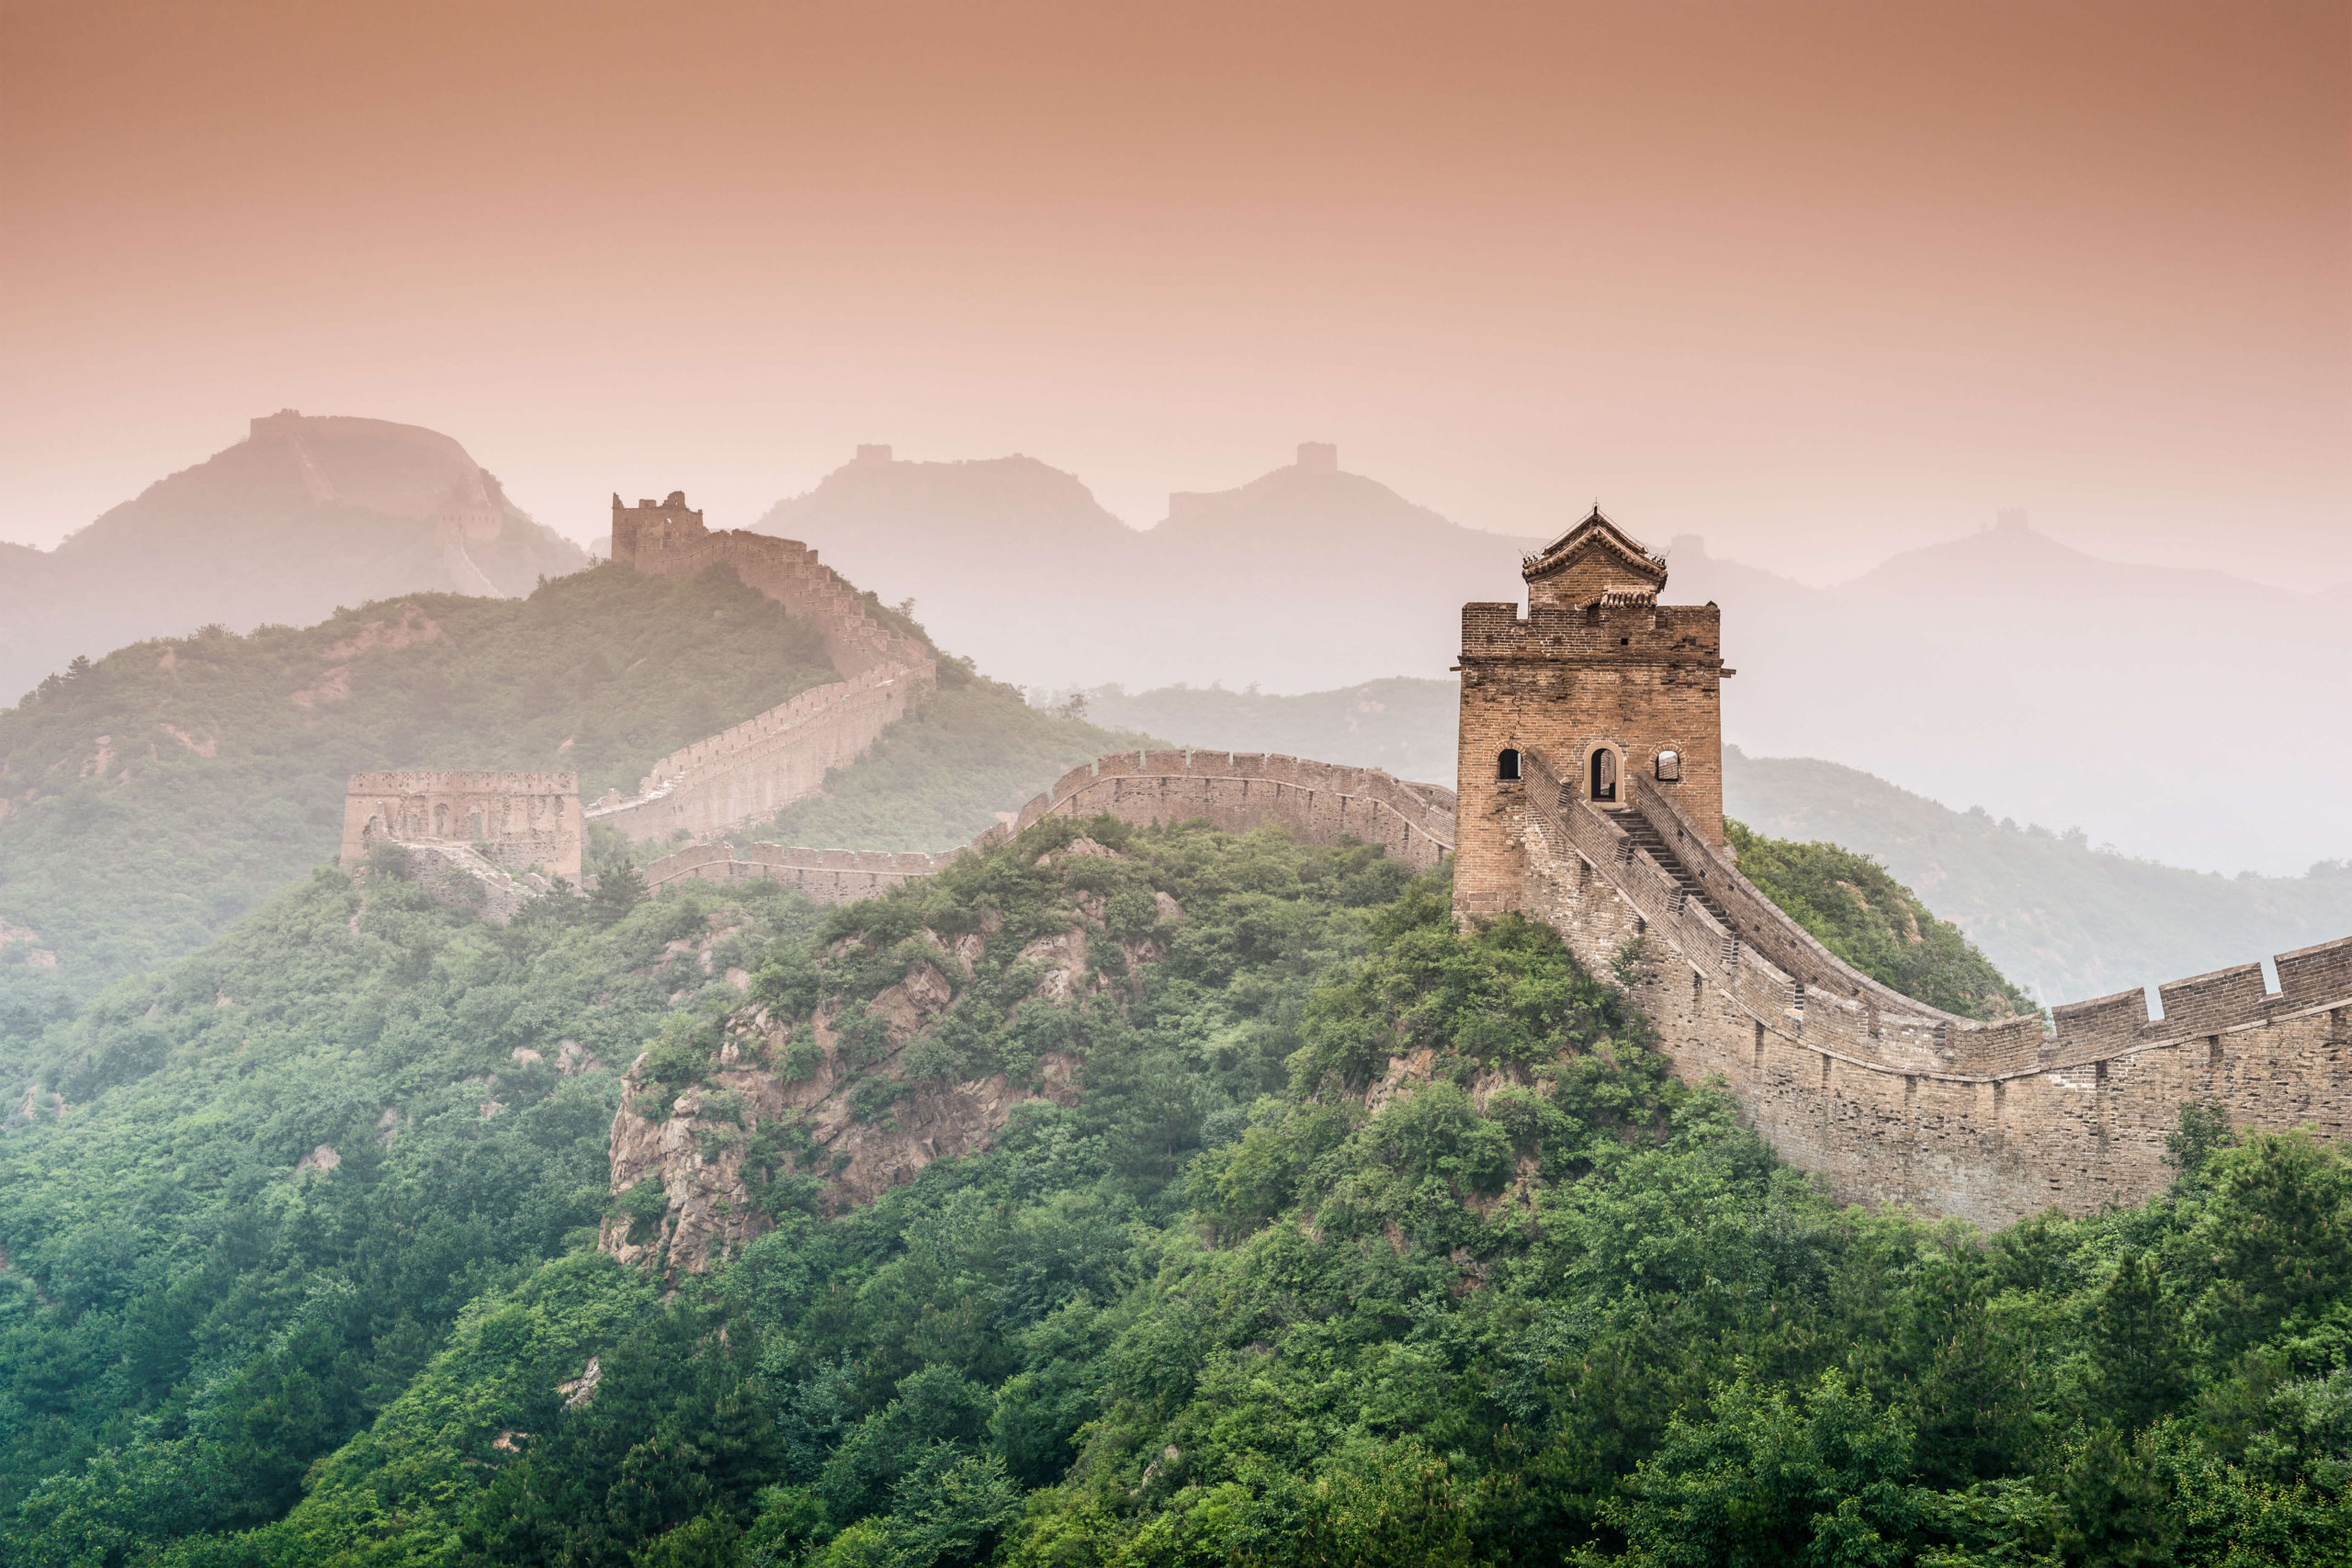 <b>YAHOO FINANCE:</b> How to Enjoy a Private Lunch on the Great Wall of China With Tully Luxury Travel